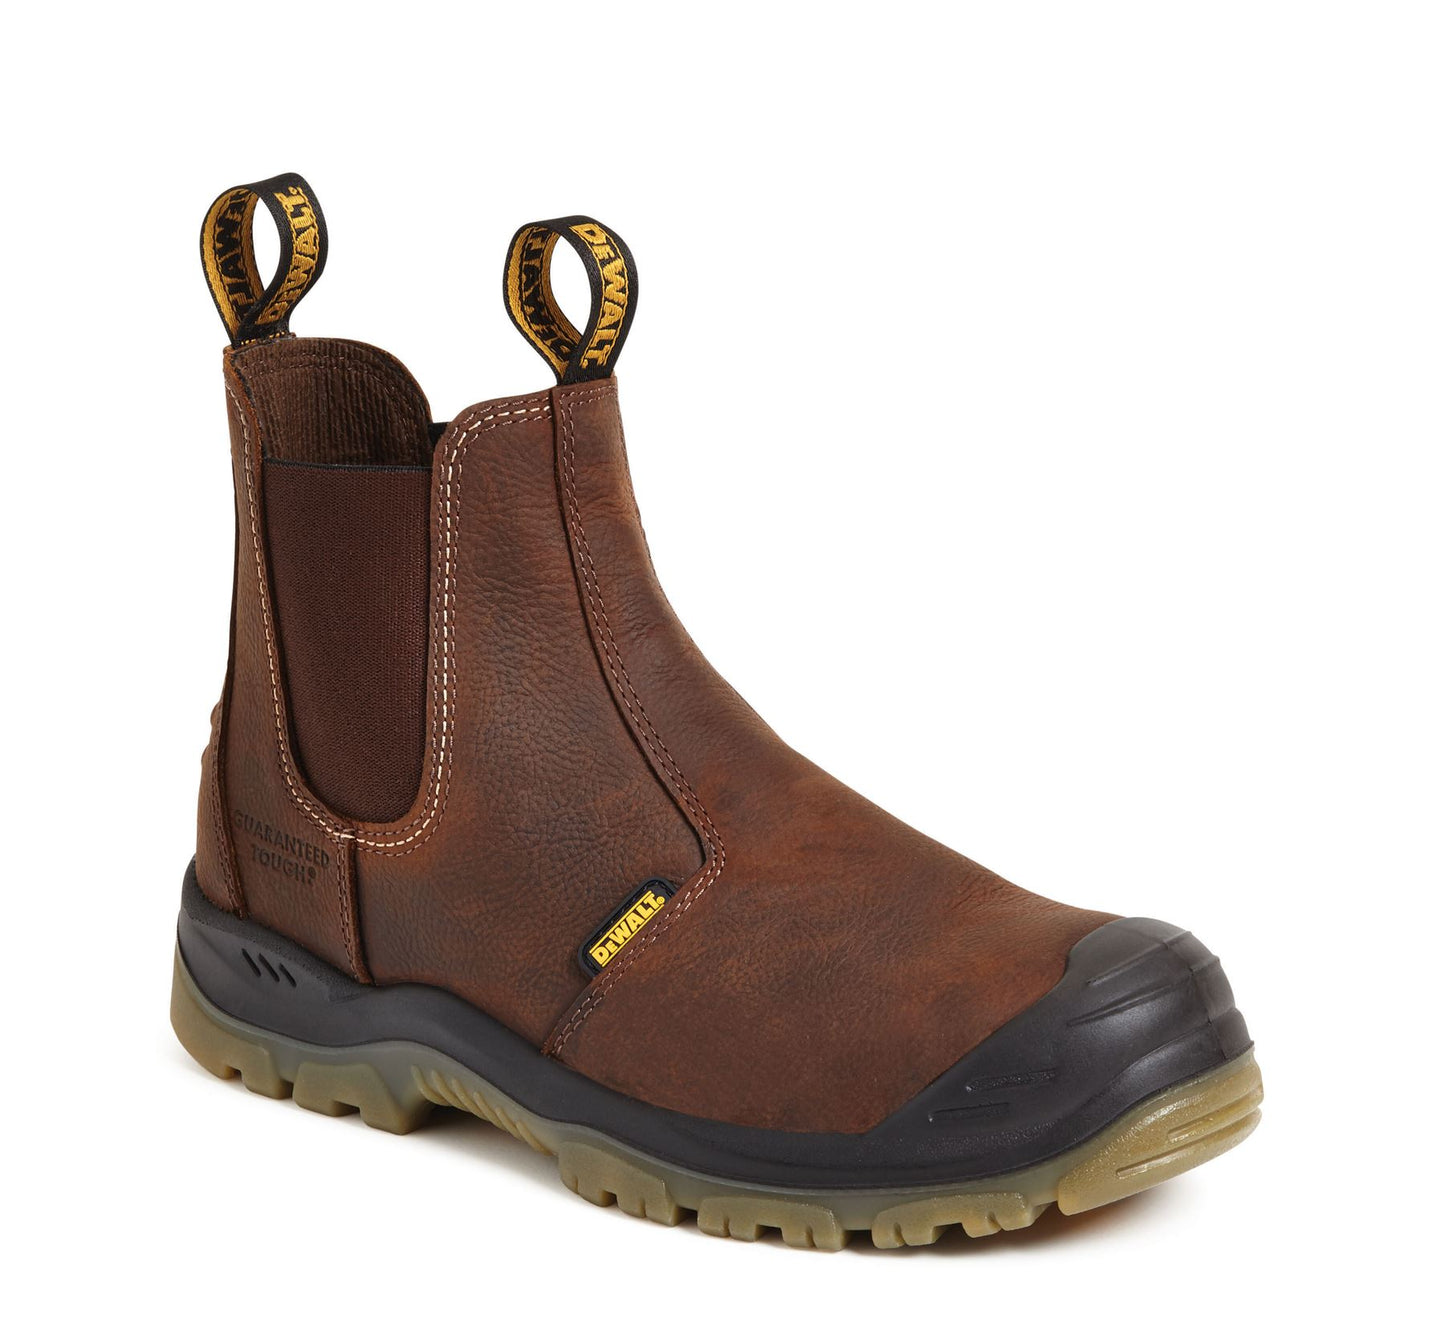 Grafton Water Resistant Safety Boots in Brown